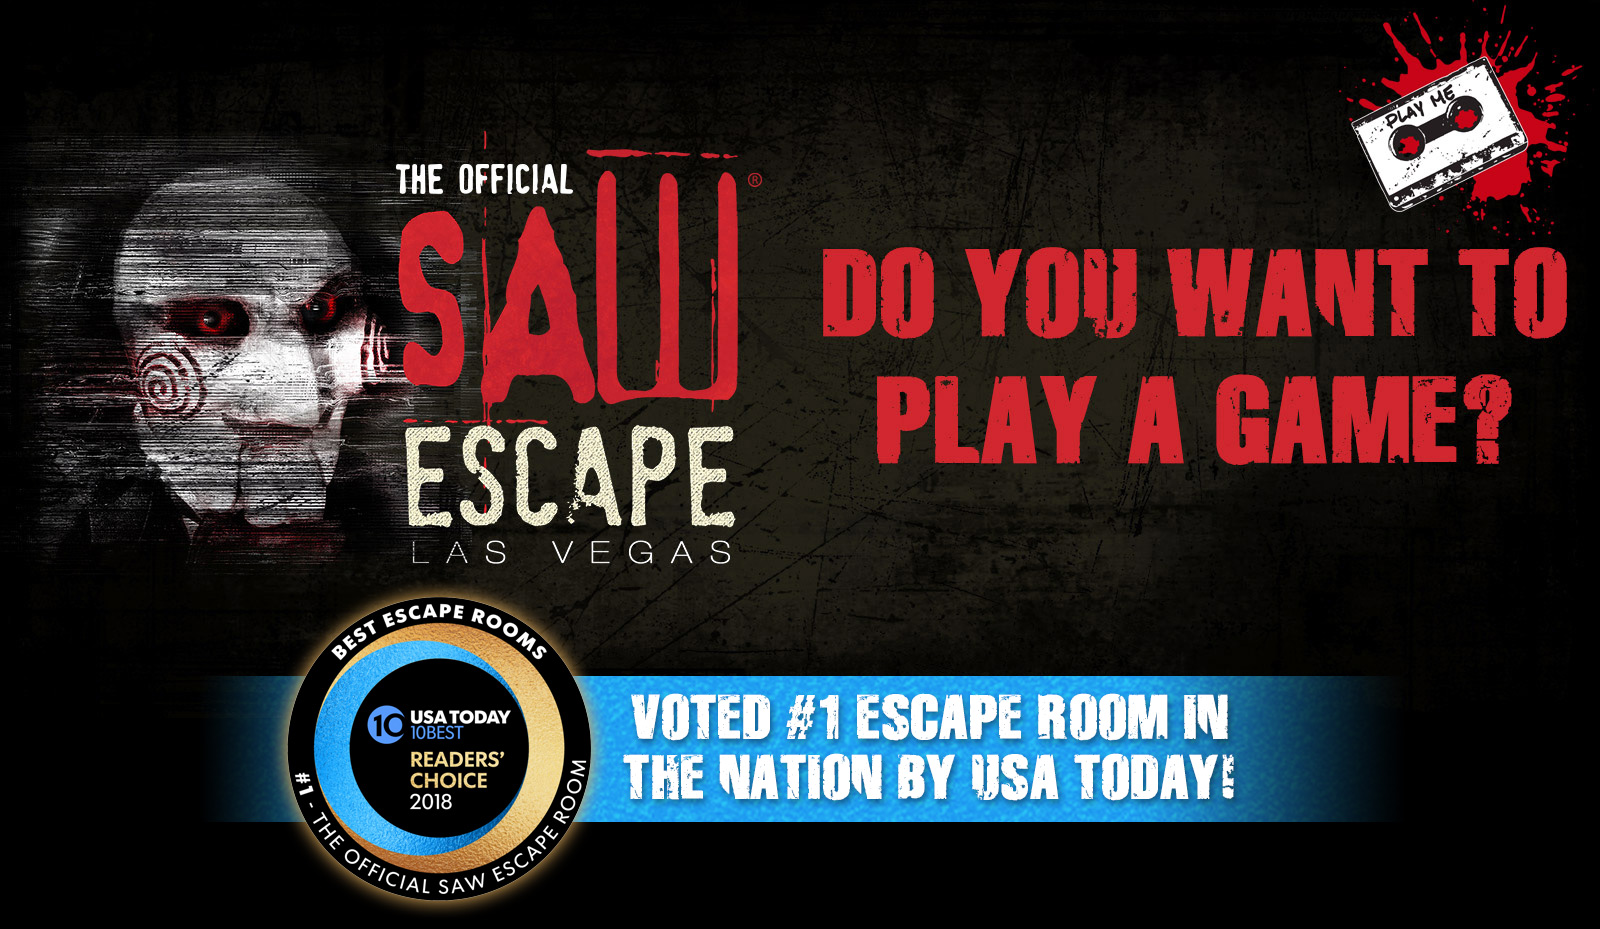 Official Saw Escape Do You Want To Play A Game